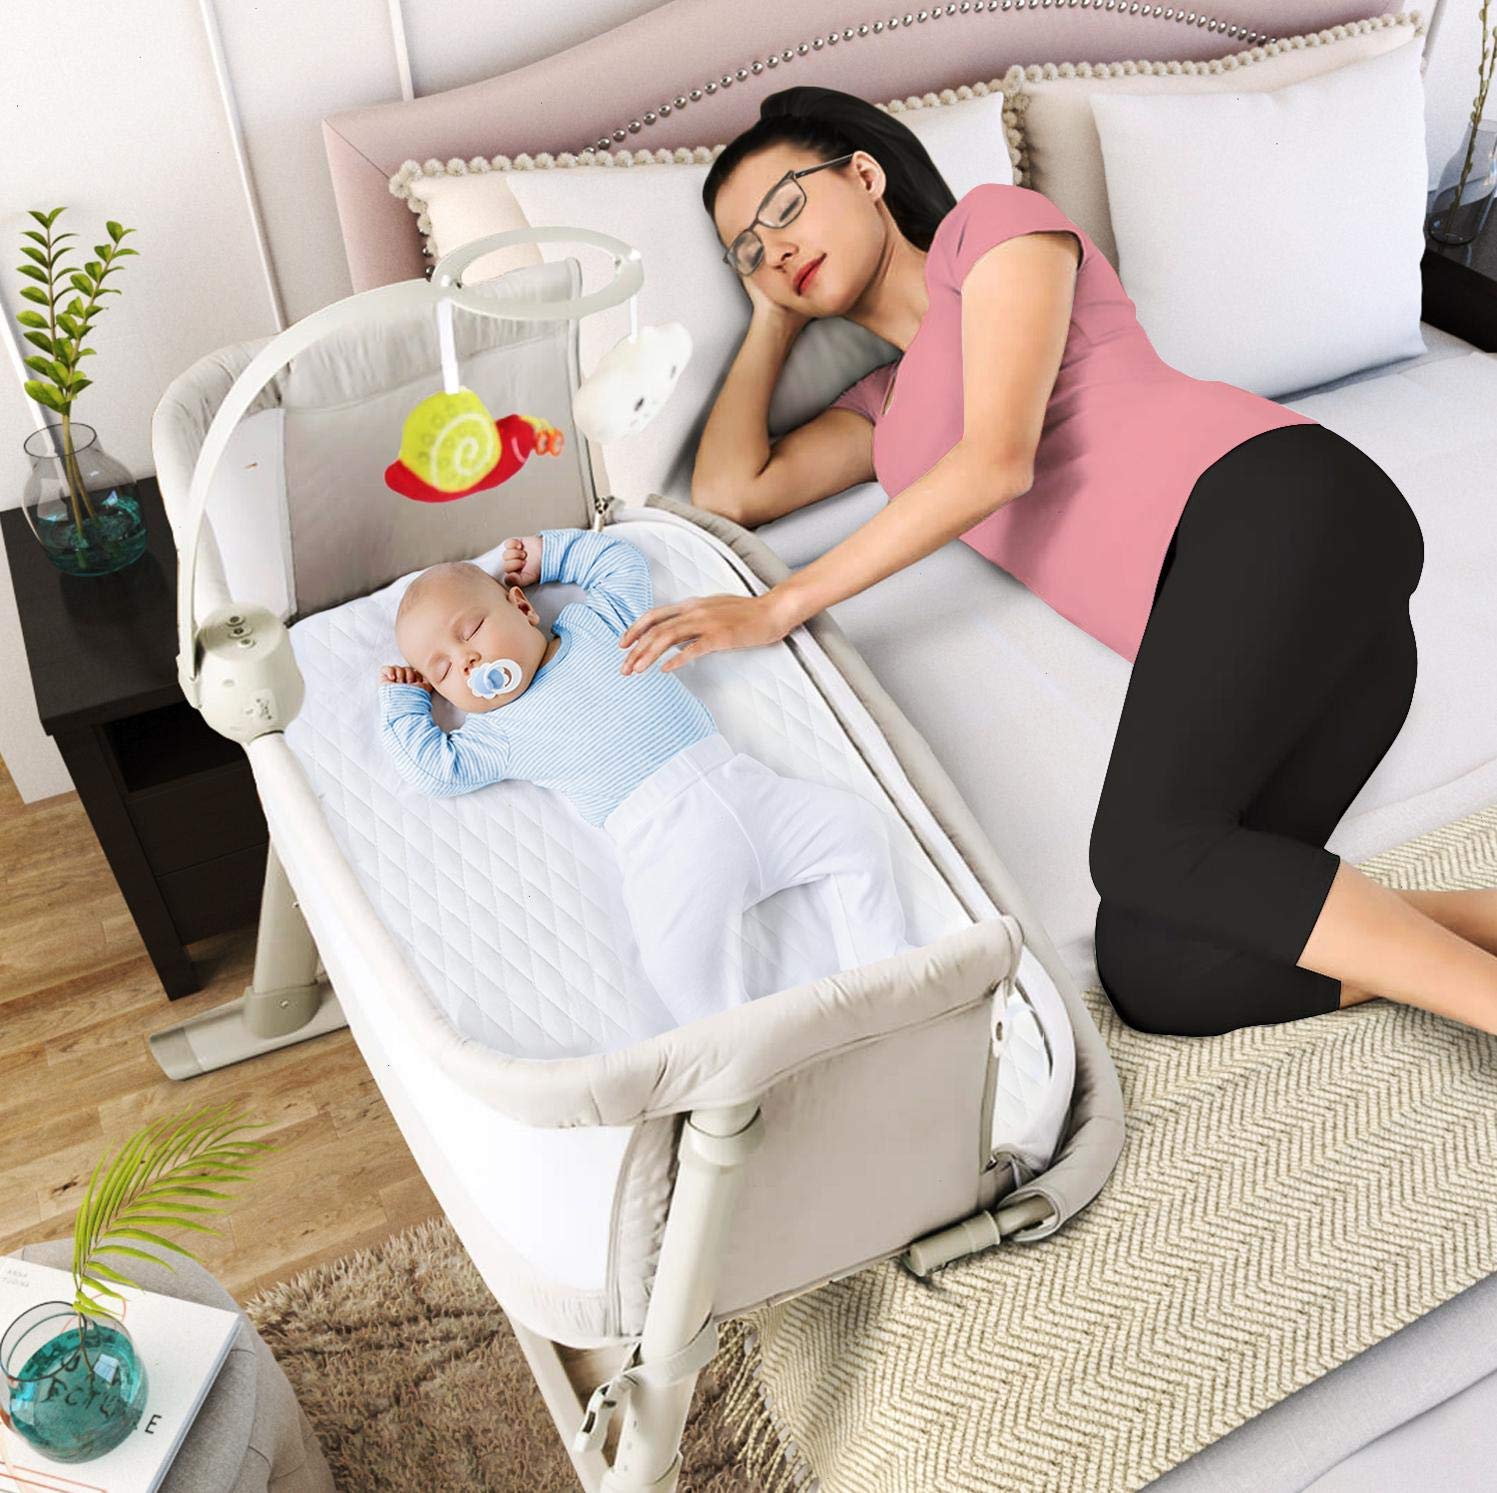 10 Best Baby Crib Mattresses Reviews & Buyer's Guide